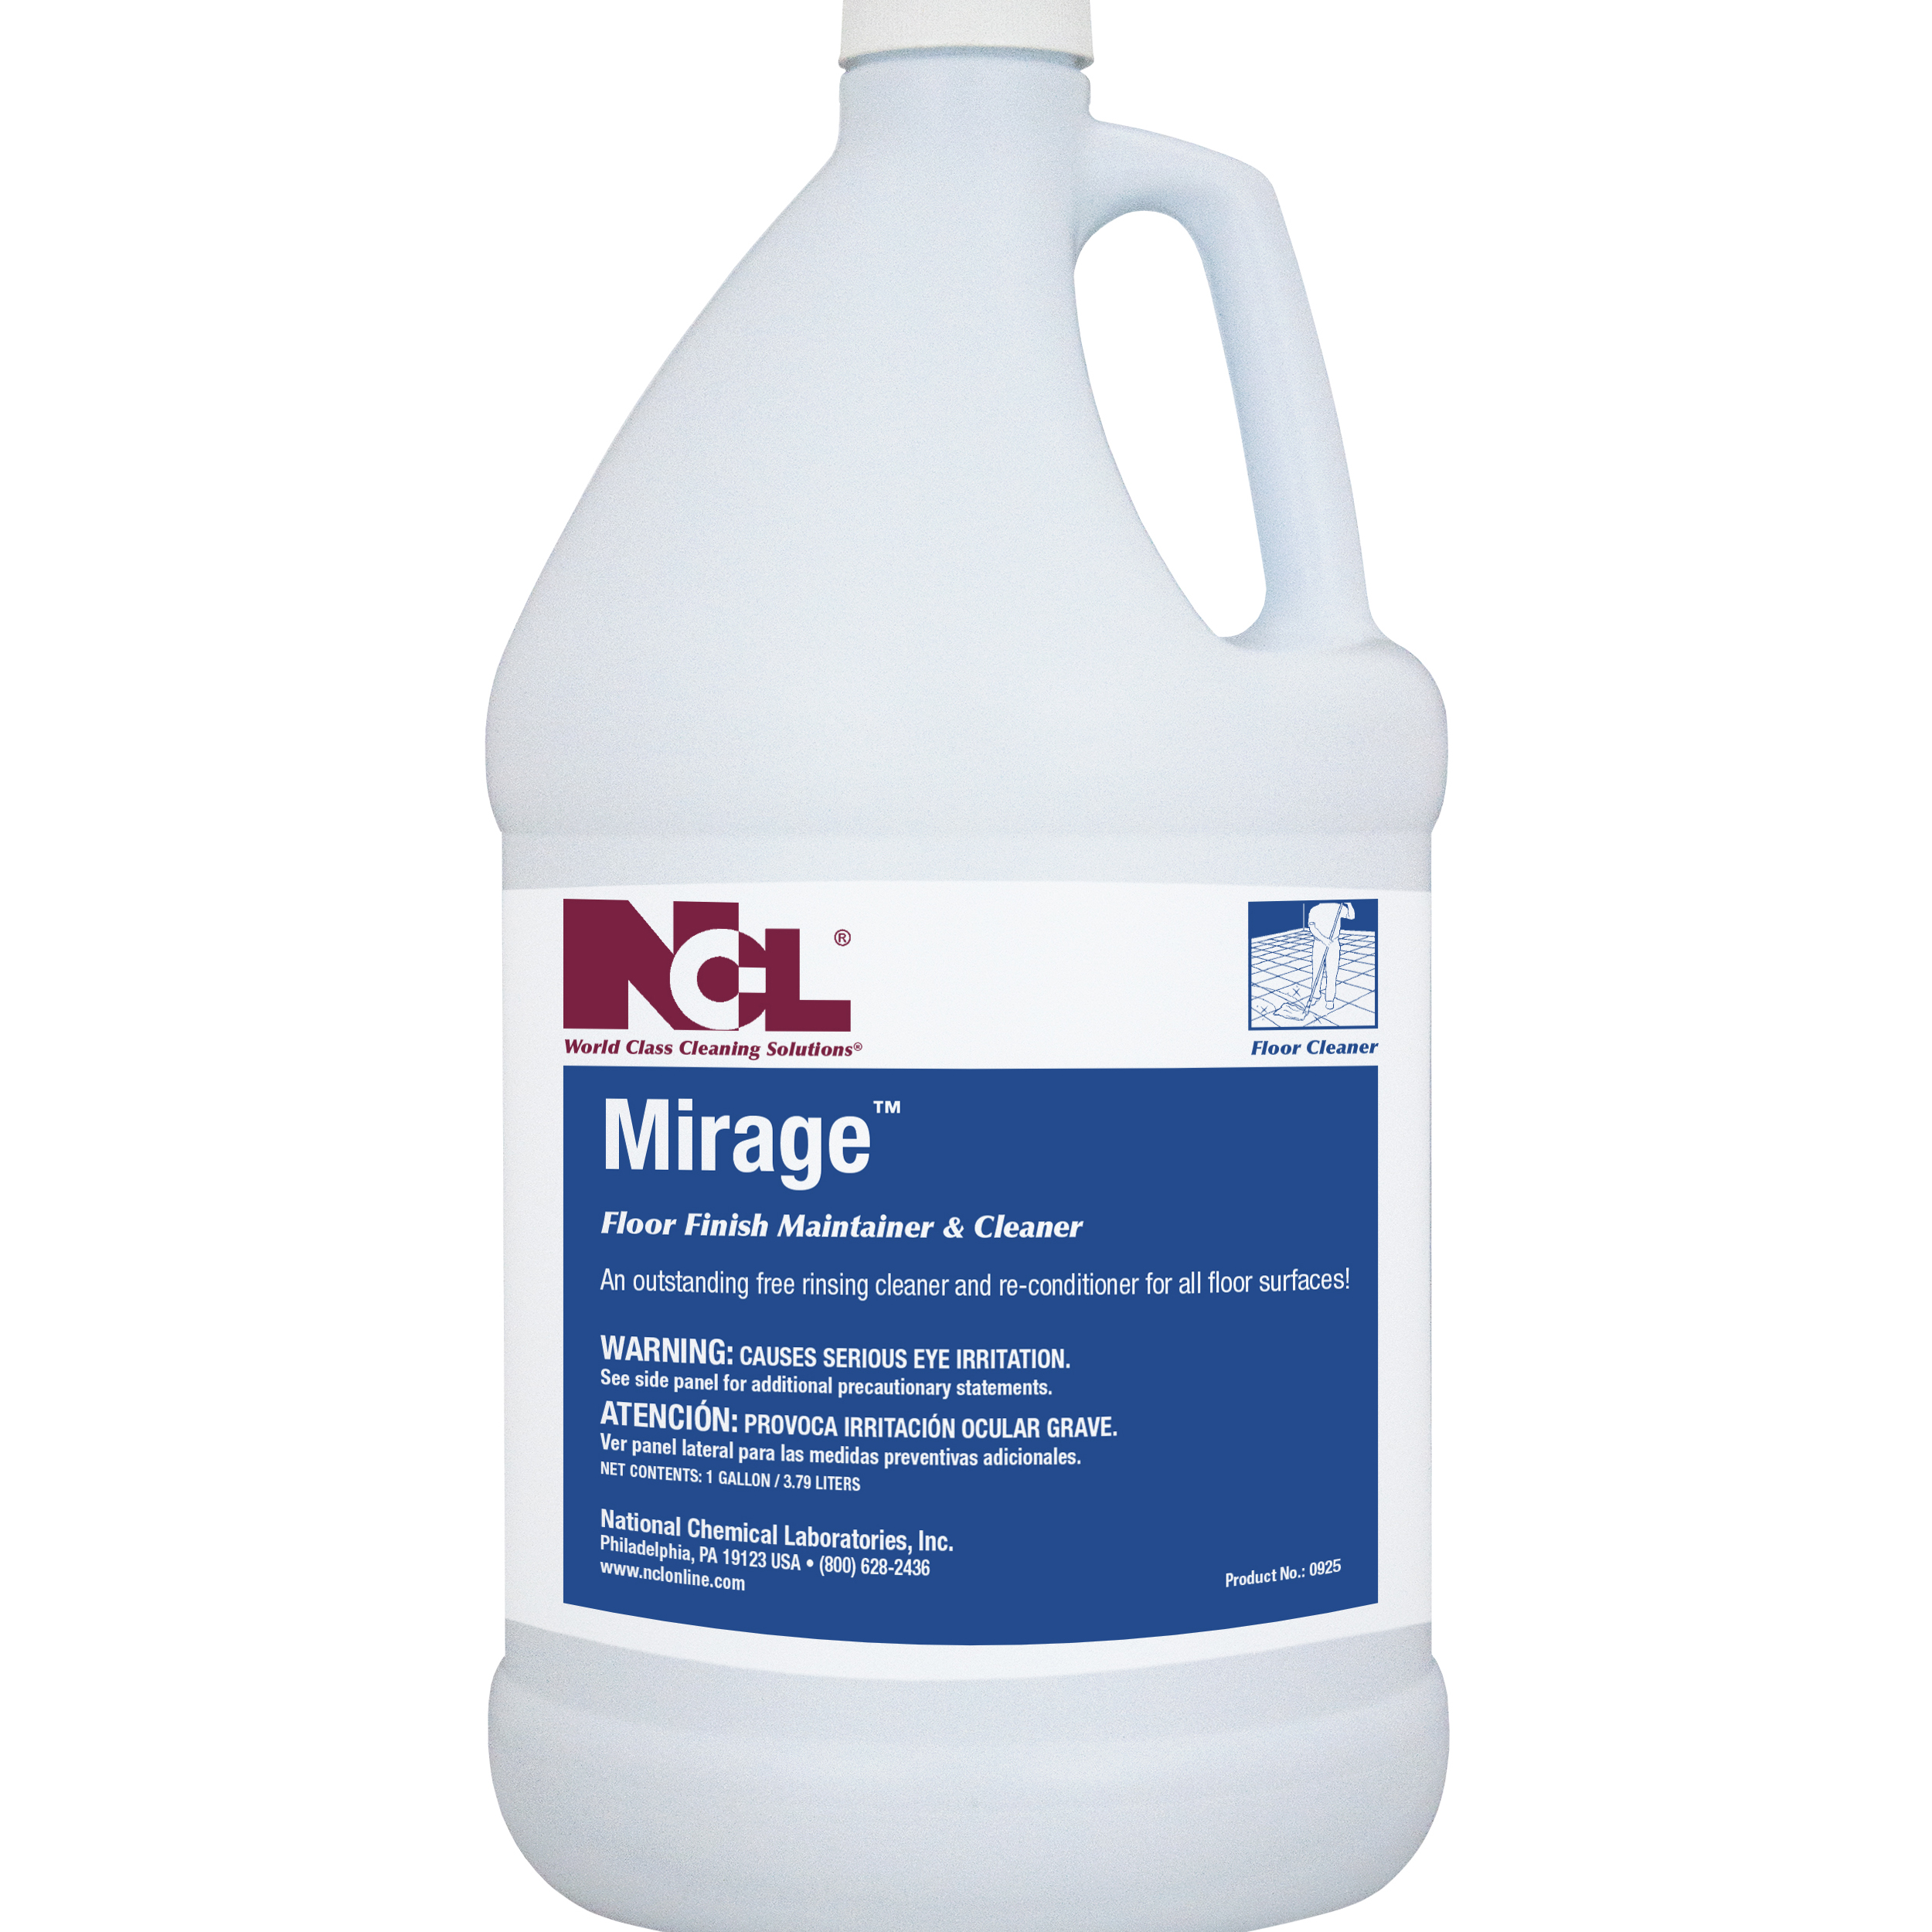  MIRAGE Neutral Floor Finish Maintainer & Cleaner 4/1 Gal. Case (NCL0925-29) 